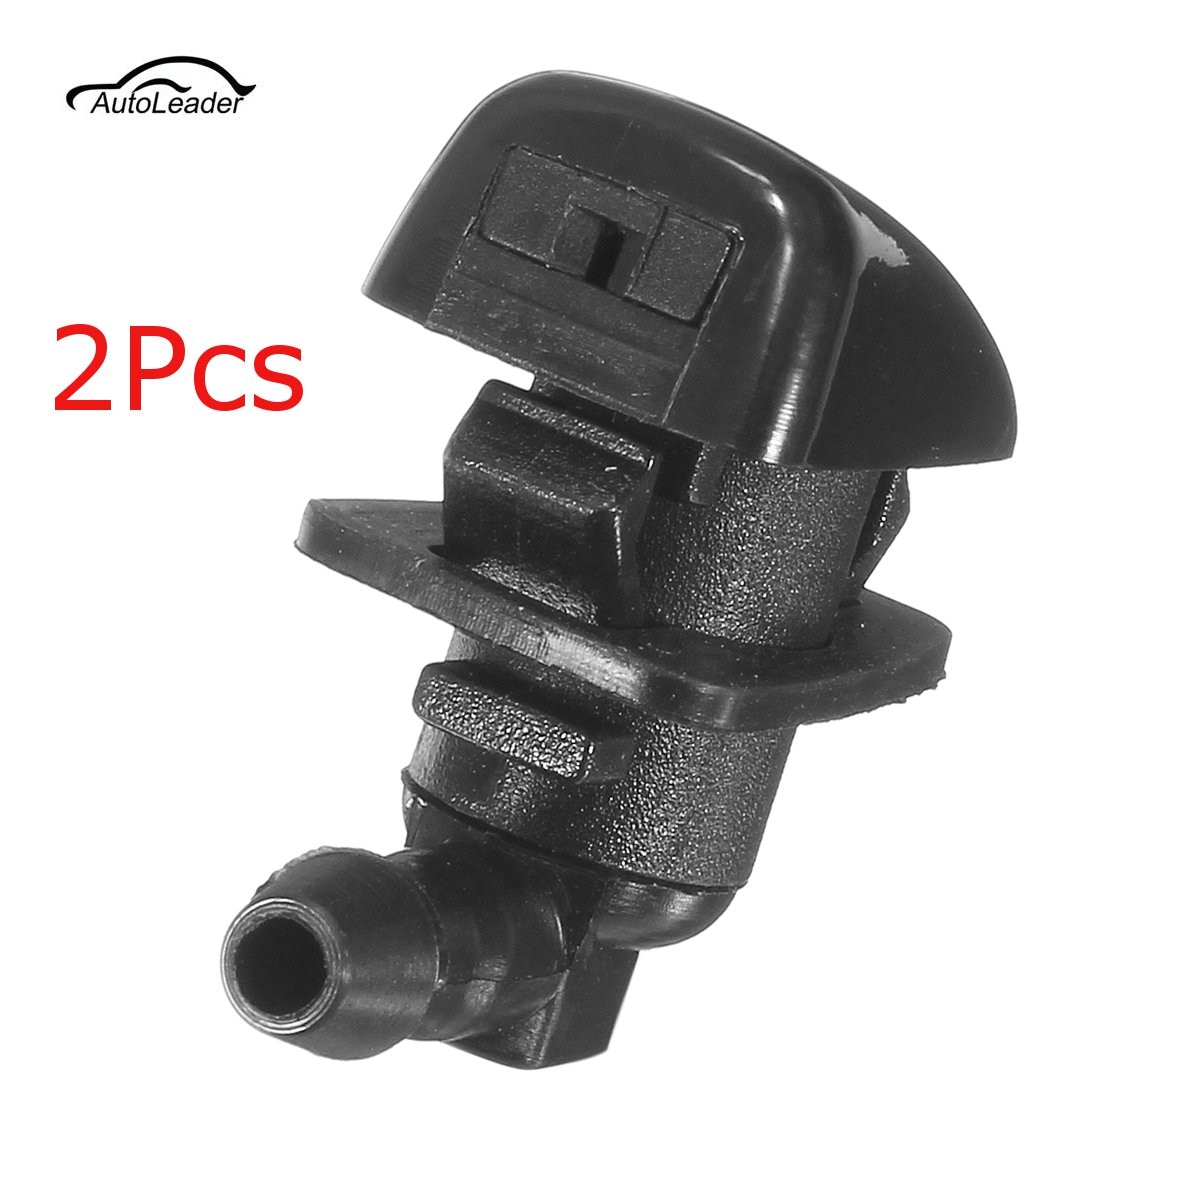    2Pcs ڵ   ǵ ô   Ʈ 7T4Z 17603 A 2007 2008 2009 2010/2Pcs Car Window Windshield Washer Spray Nozzle Jet 7T4Z 17603 A for For